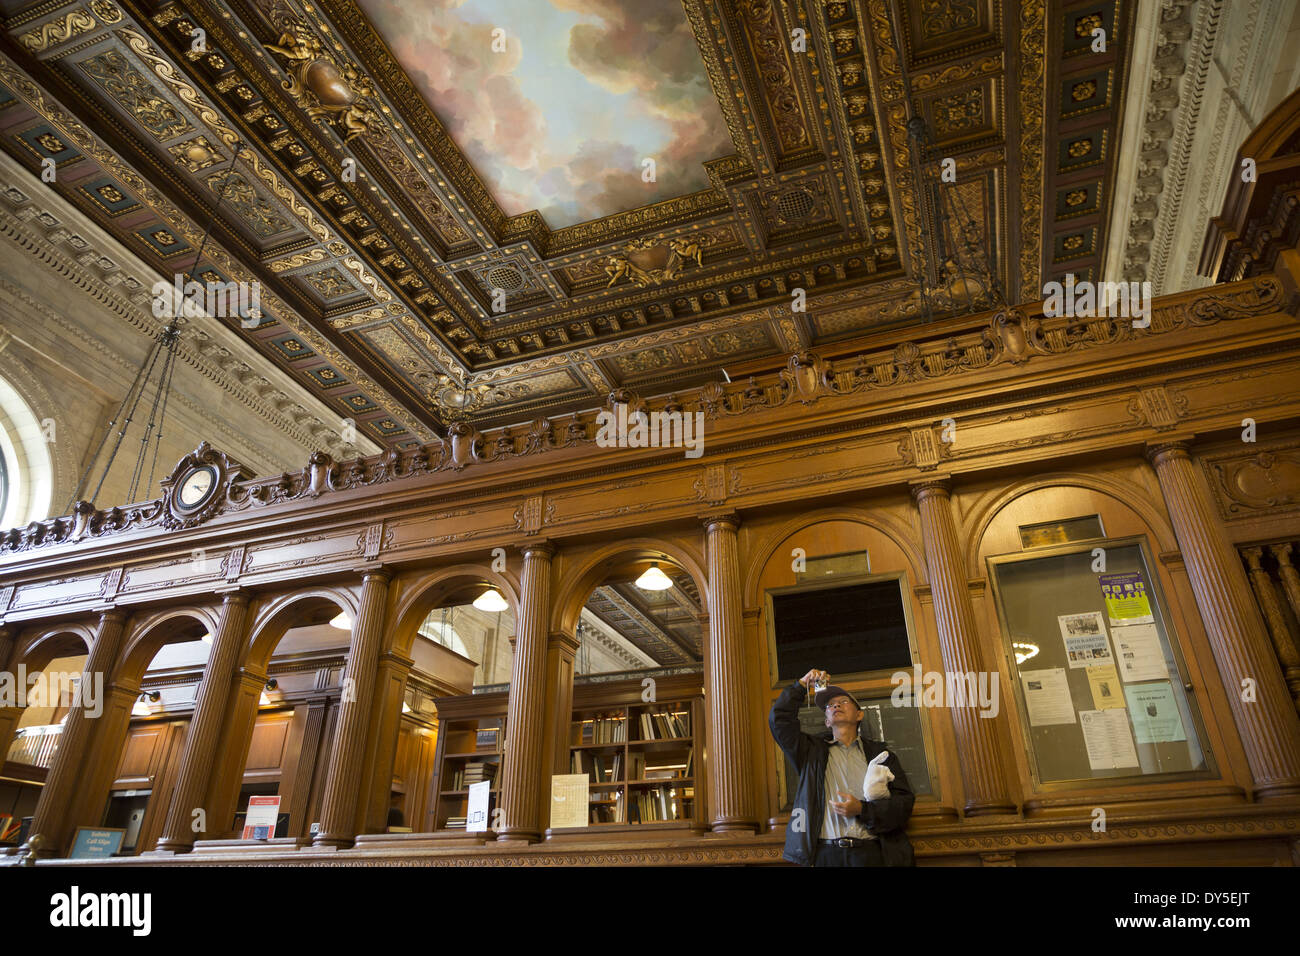 Man photographing the elaborate ceiling of the Rose Reading Room in the New York Public Library Stock Photo